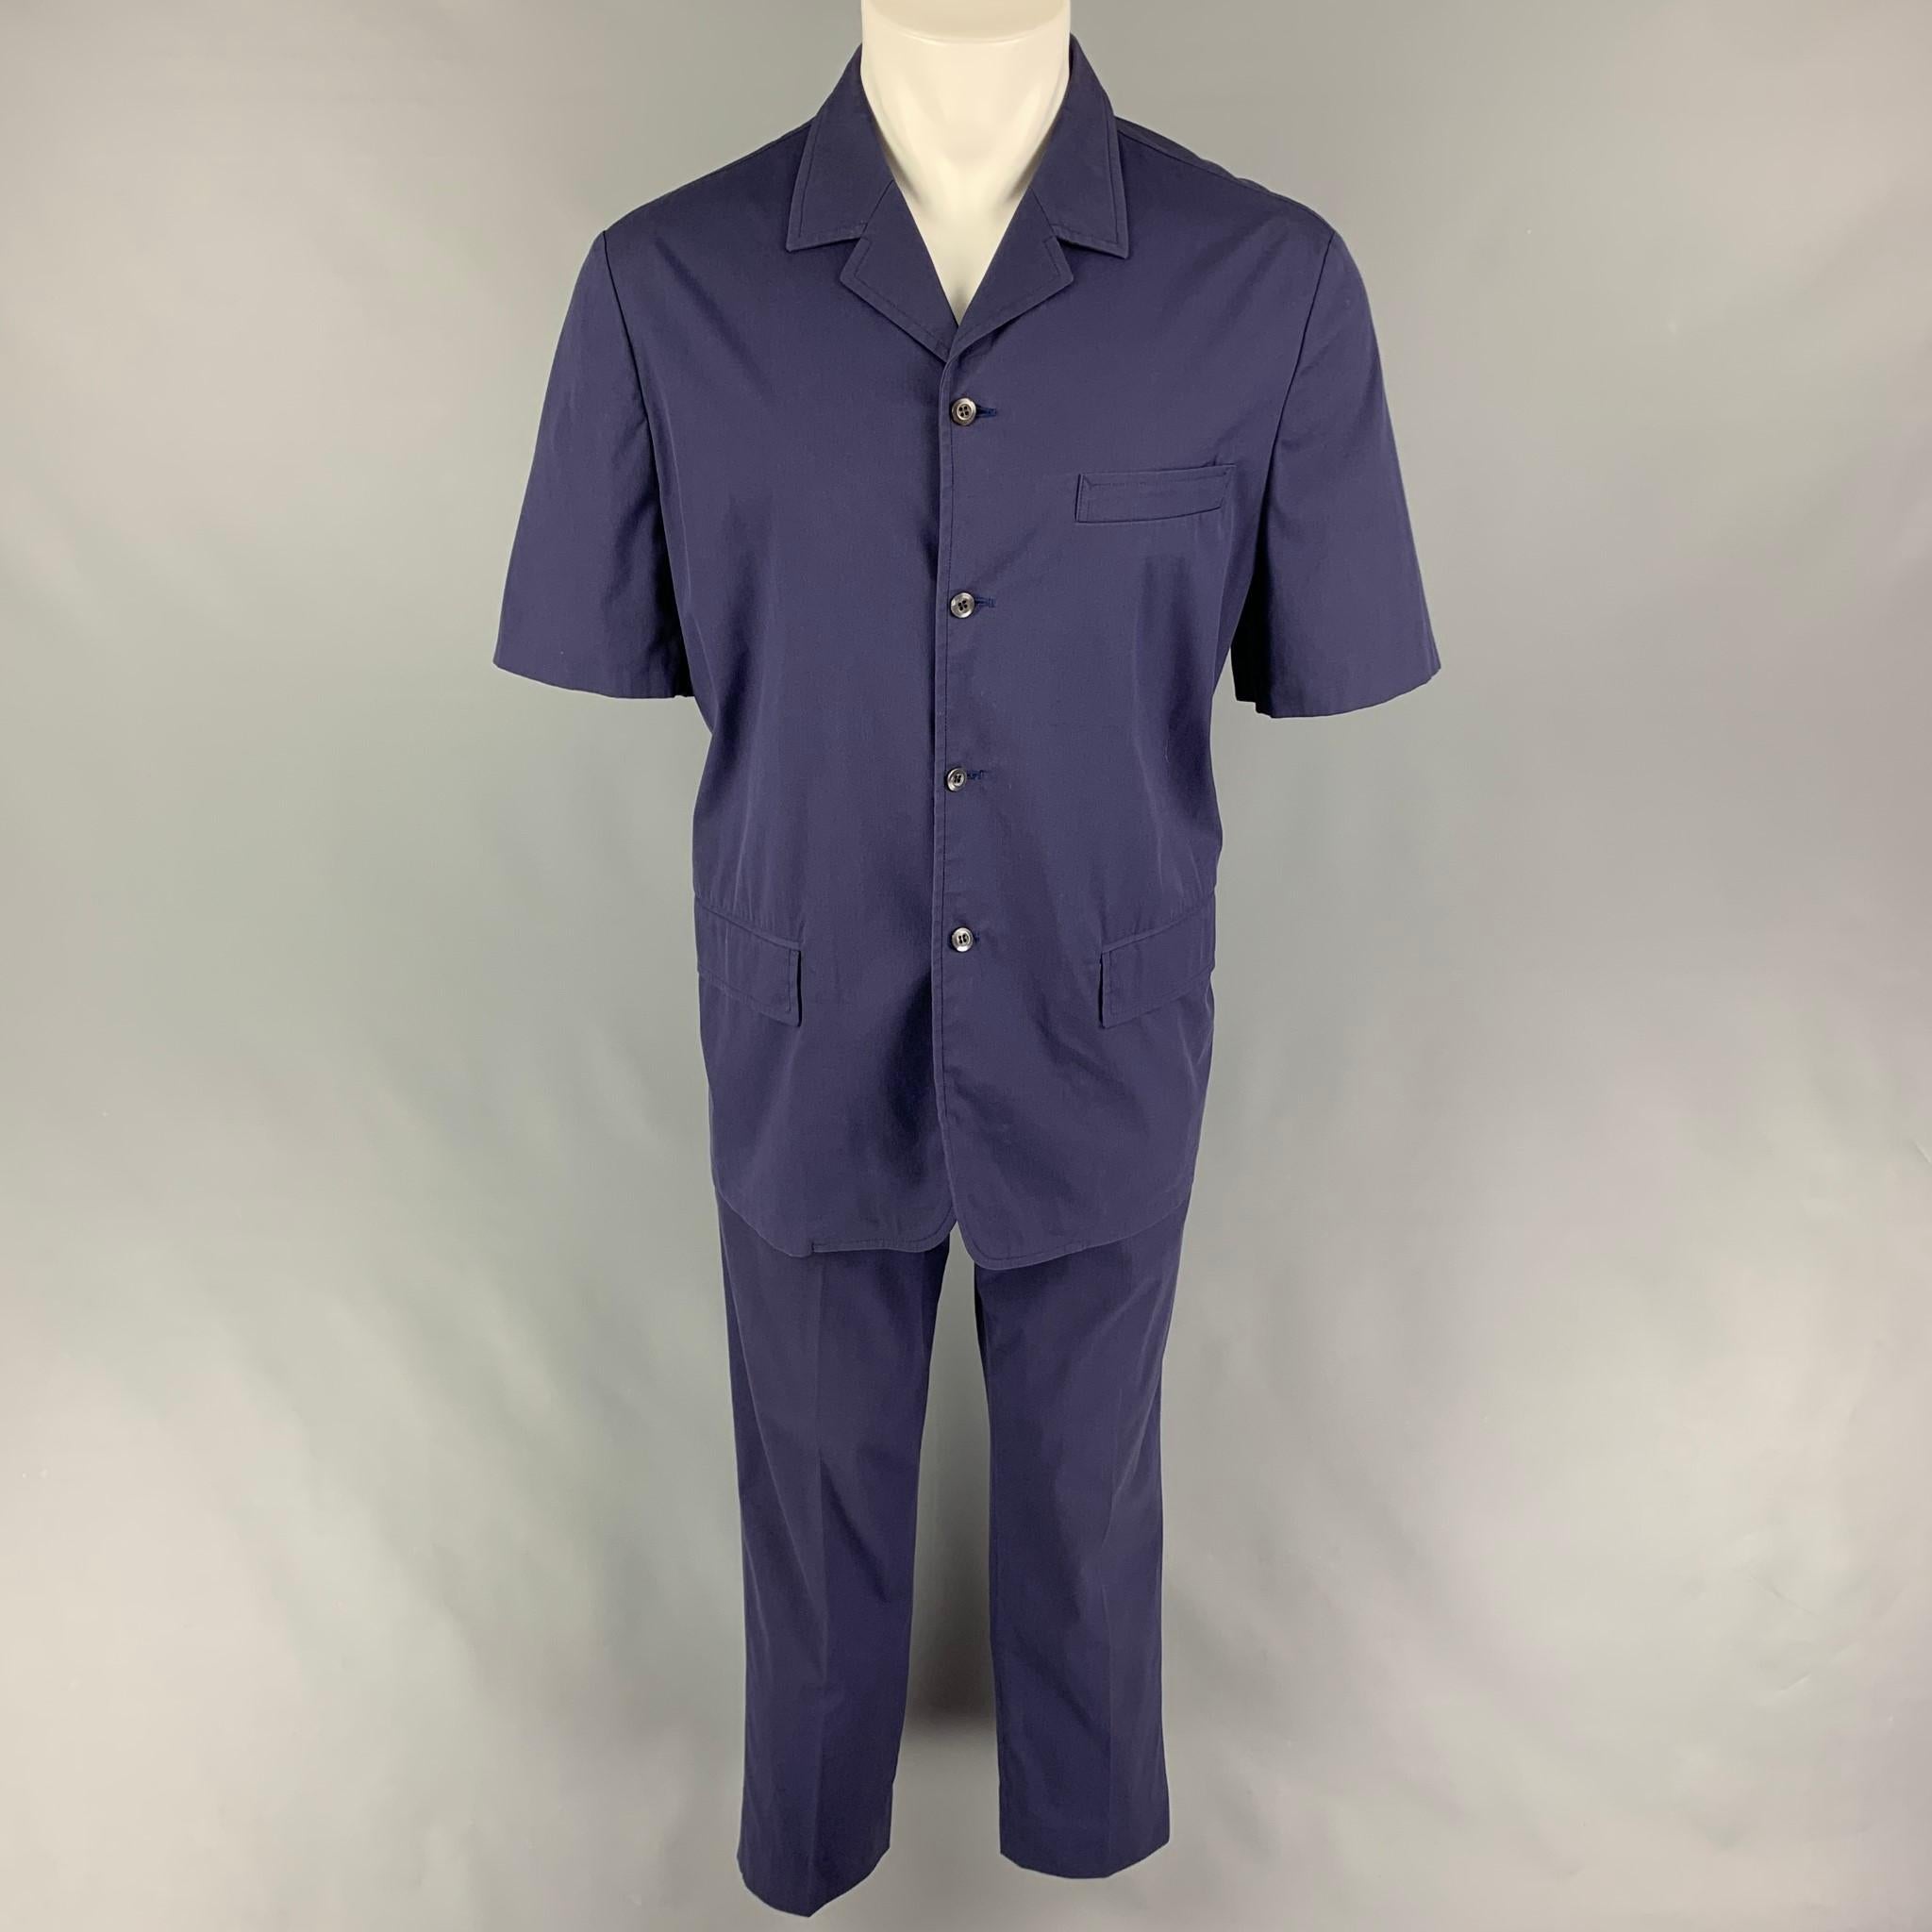 Vintage PRADA 2 Piece set comes in a navy cotton featuring a camp collar, flap pocket, short sleeves, loose fit buttoned shirt, and matching flat front trousers. Made in Italy. 

Very Good Pre-Owned Condition.
Marked: